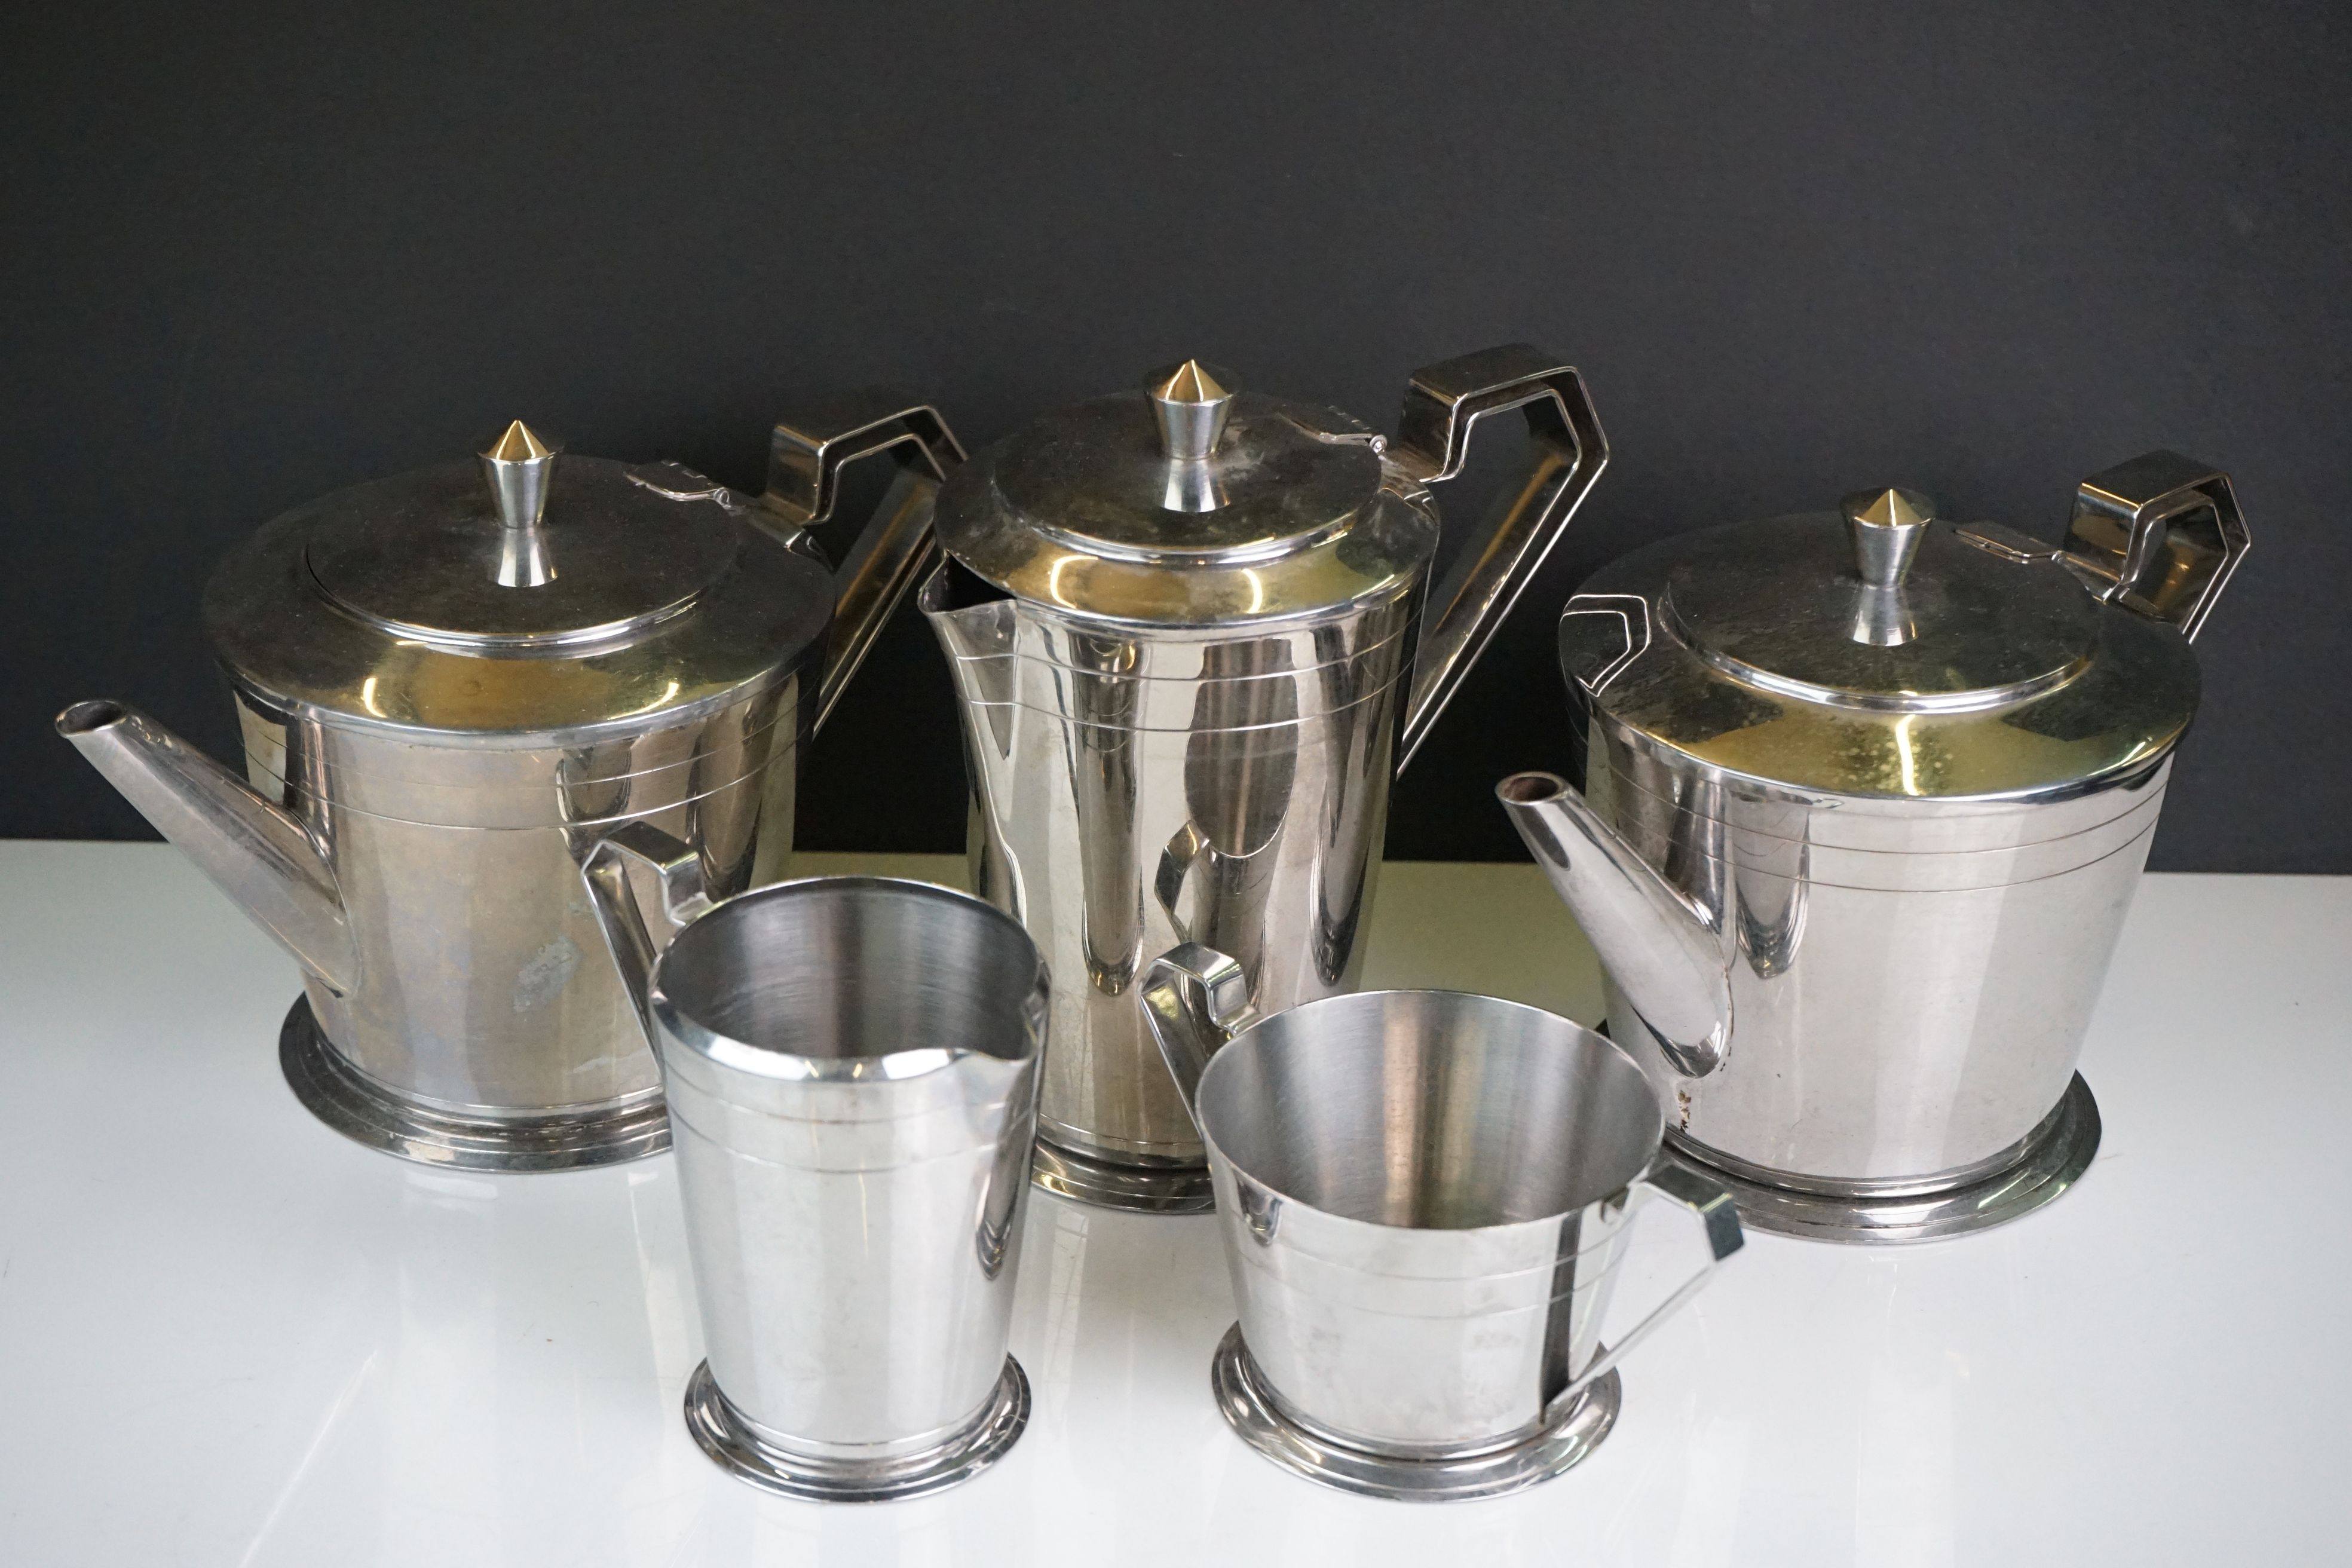 A mid 20th century stainless steel tea service by Oldhall.